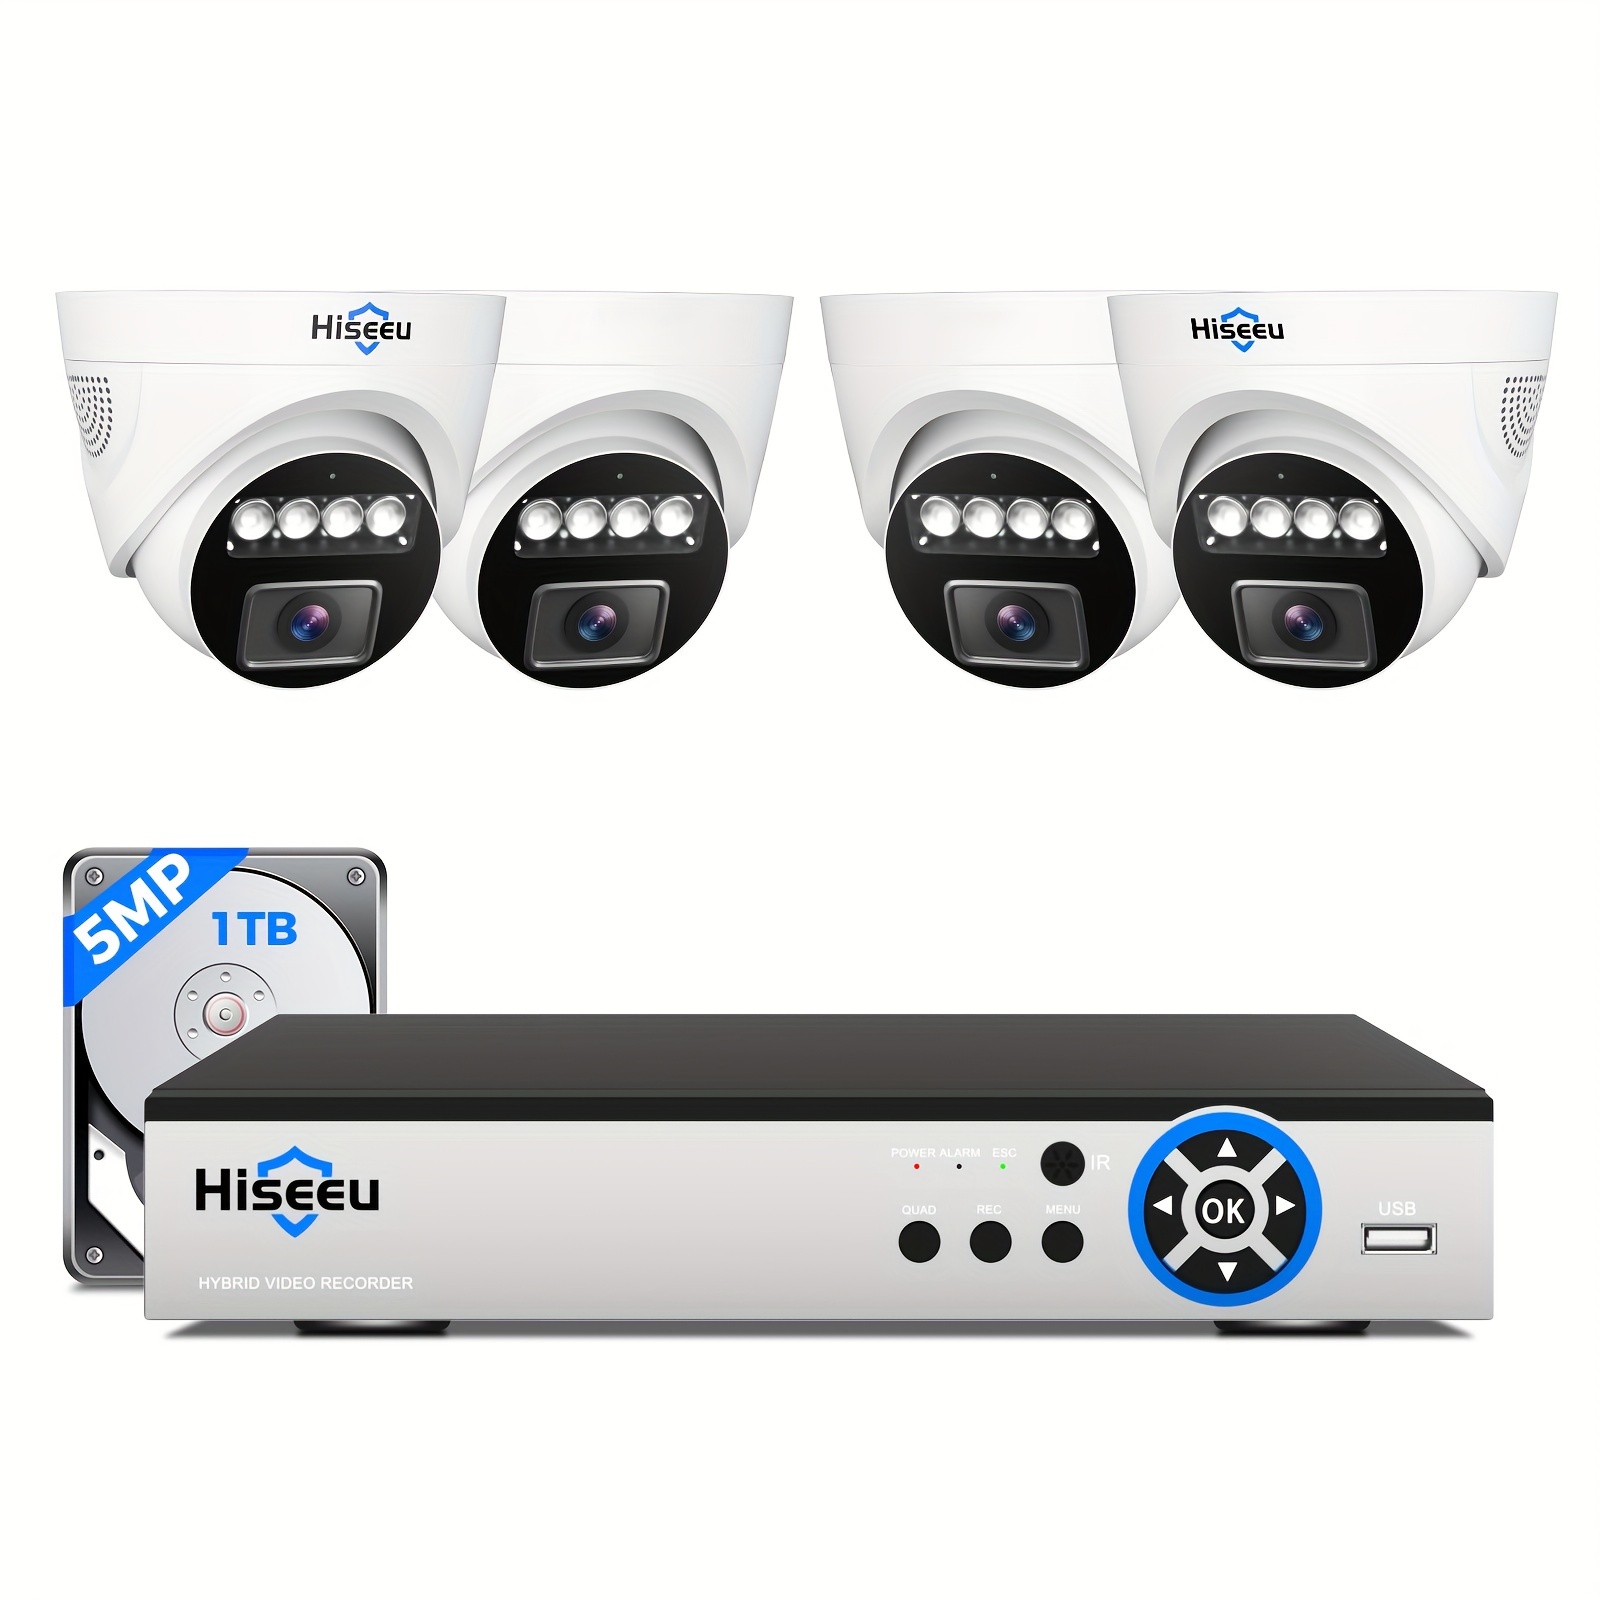 

Hiseeu 5mp Home , 4 Dome And Indoor Safety Cameras, 5mp Dvr Remote Access, Night Vision, 1tb Hdd, 7/24 Recording, Motion Alarms For Cctv Surveillance Dvr Kits